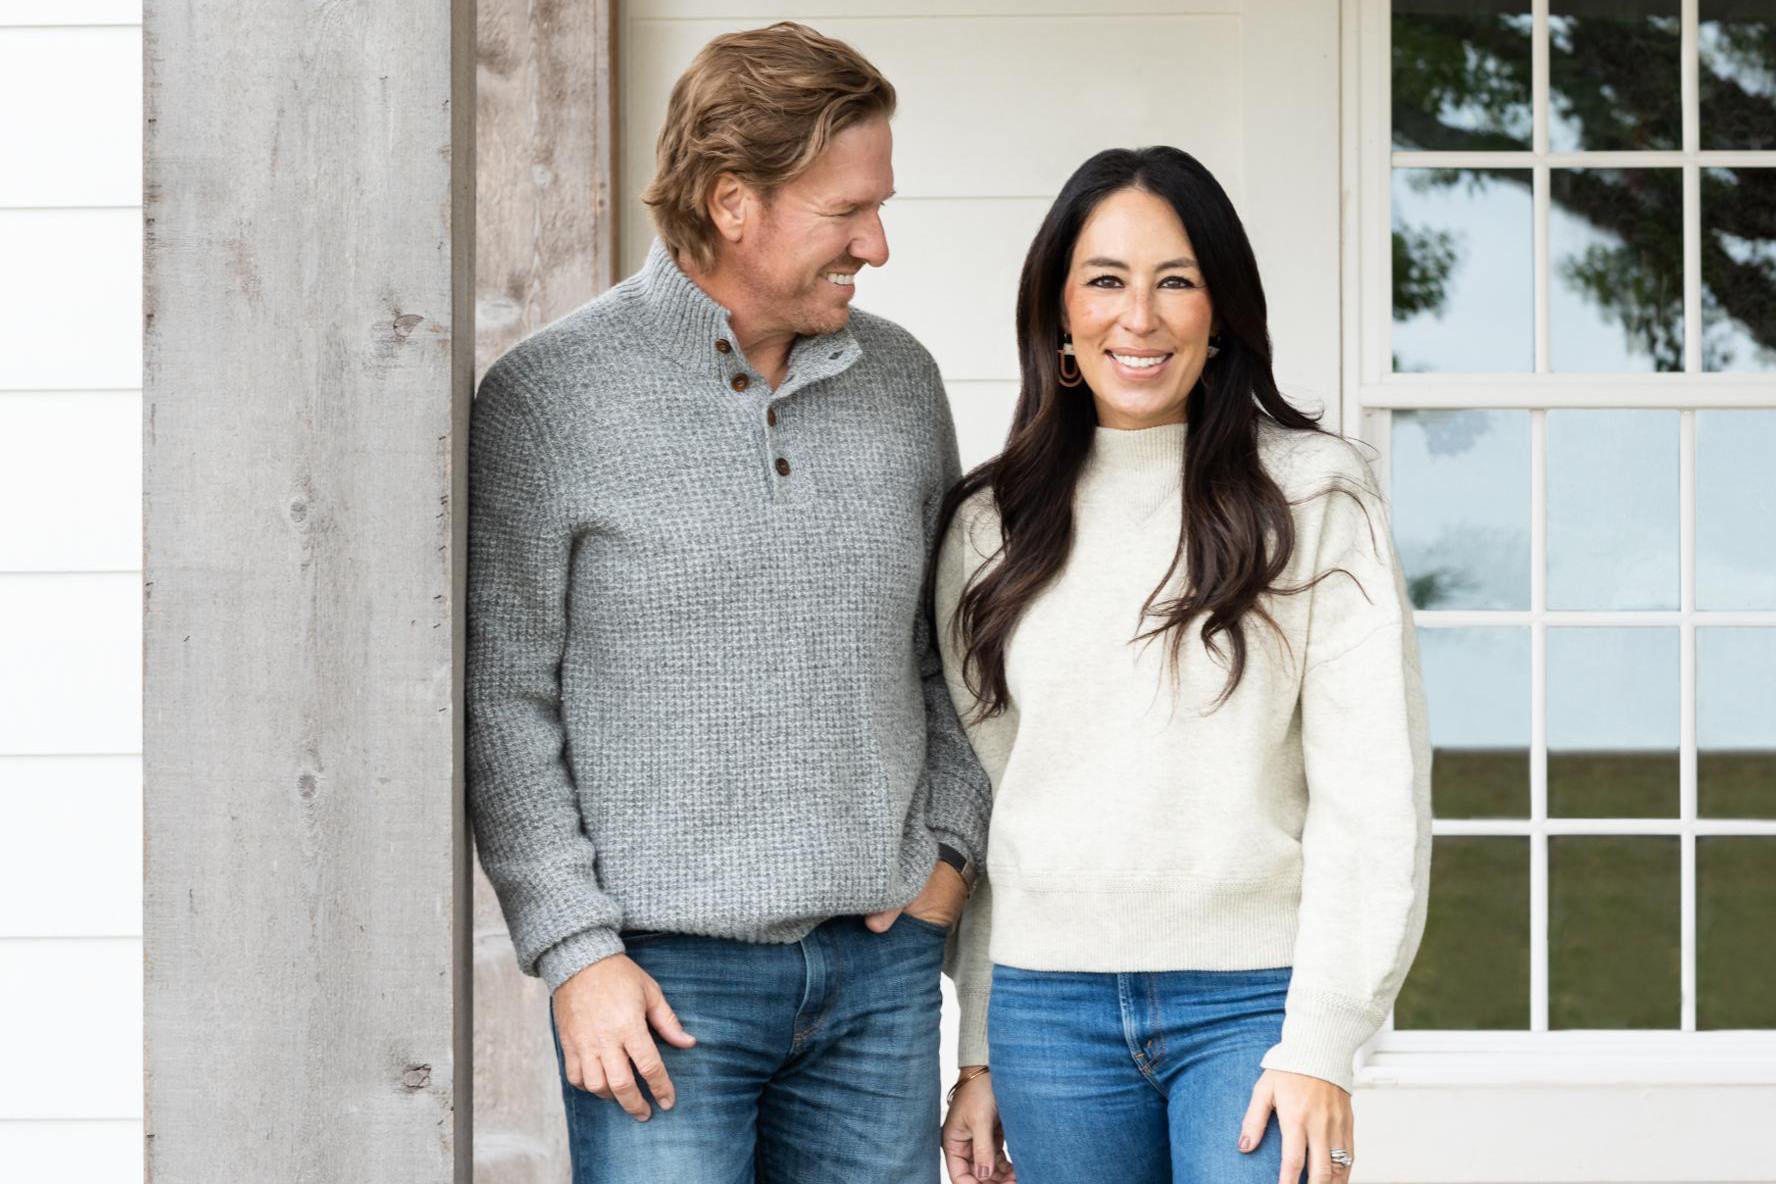 Magnolia Network from Chip & Joanna Gaines to Launch Digitally First, Linear to Launch Later This Year